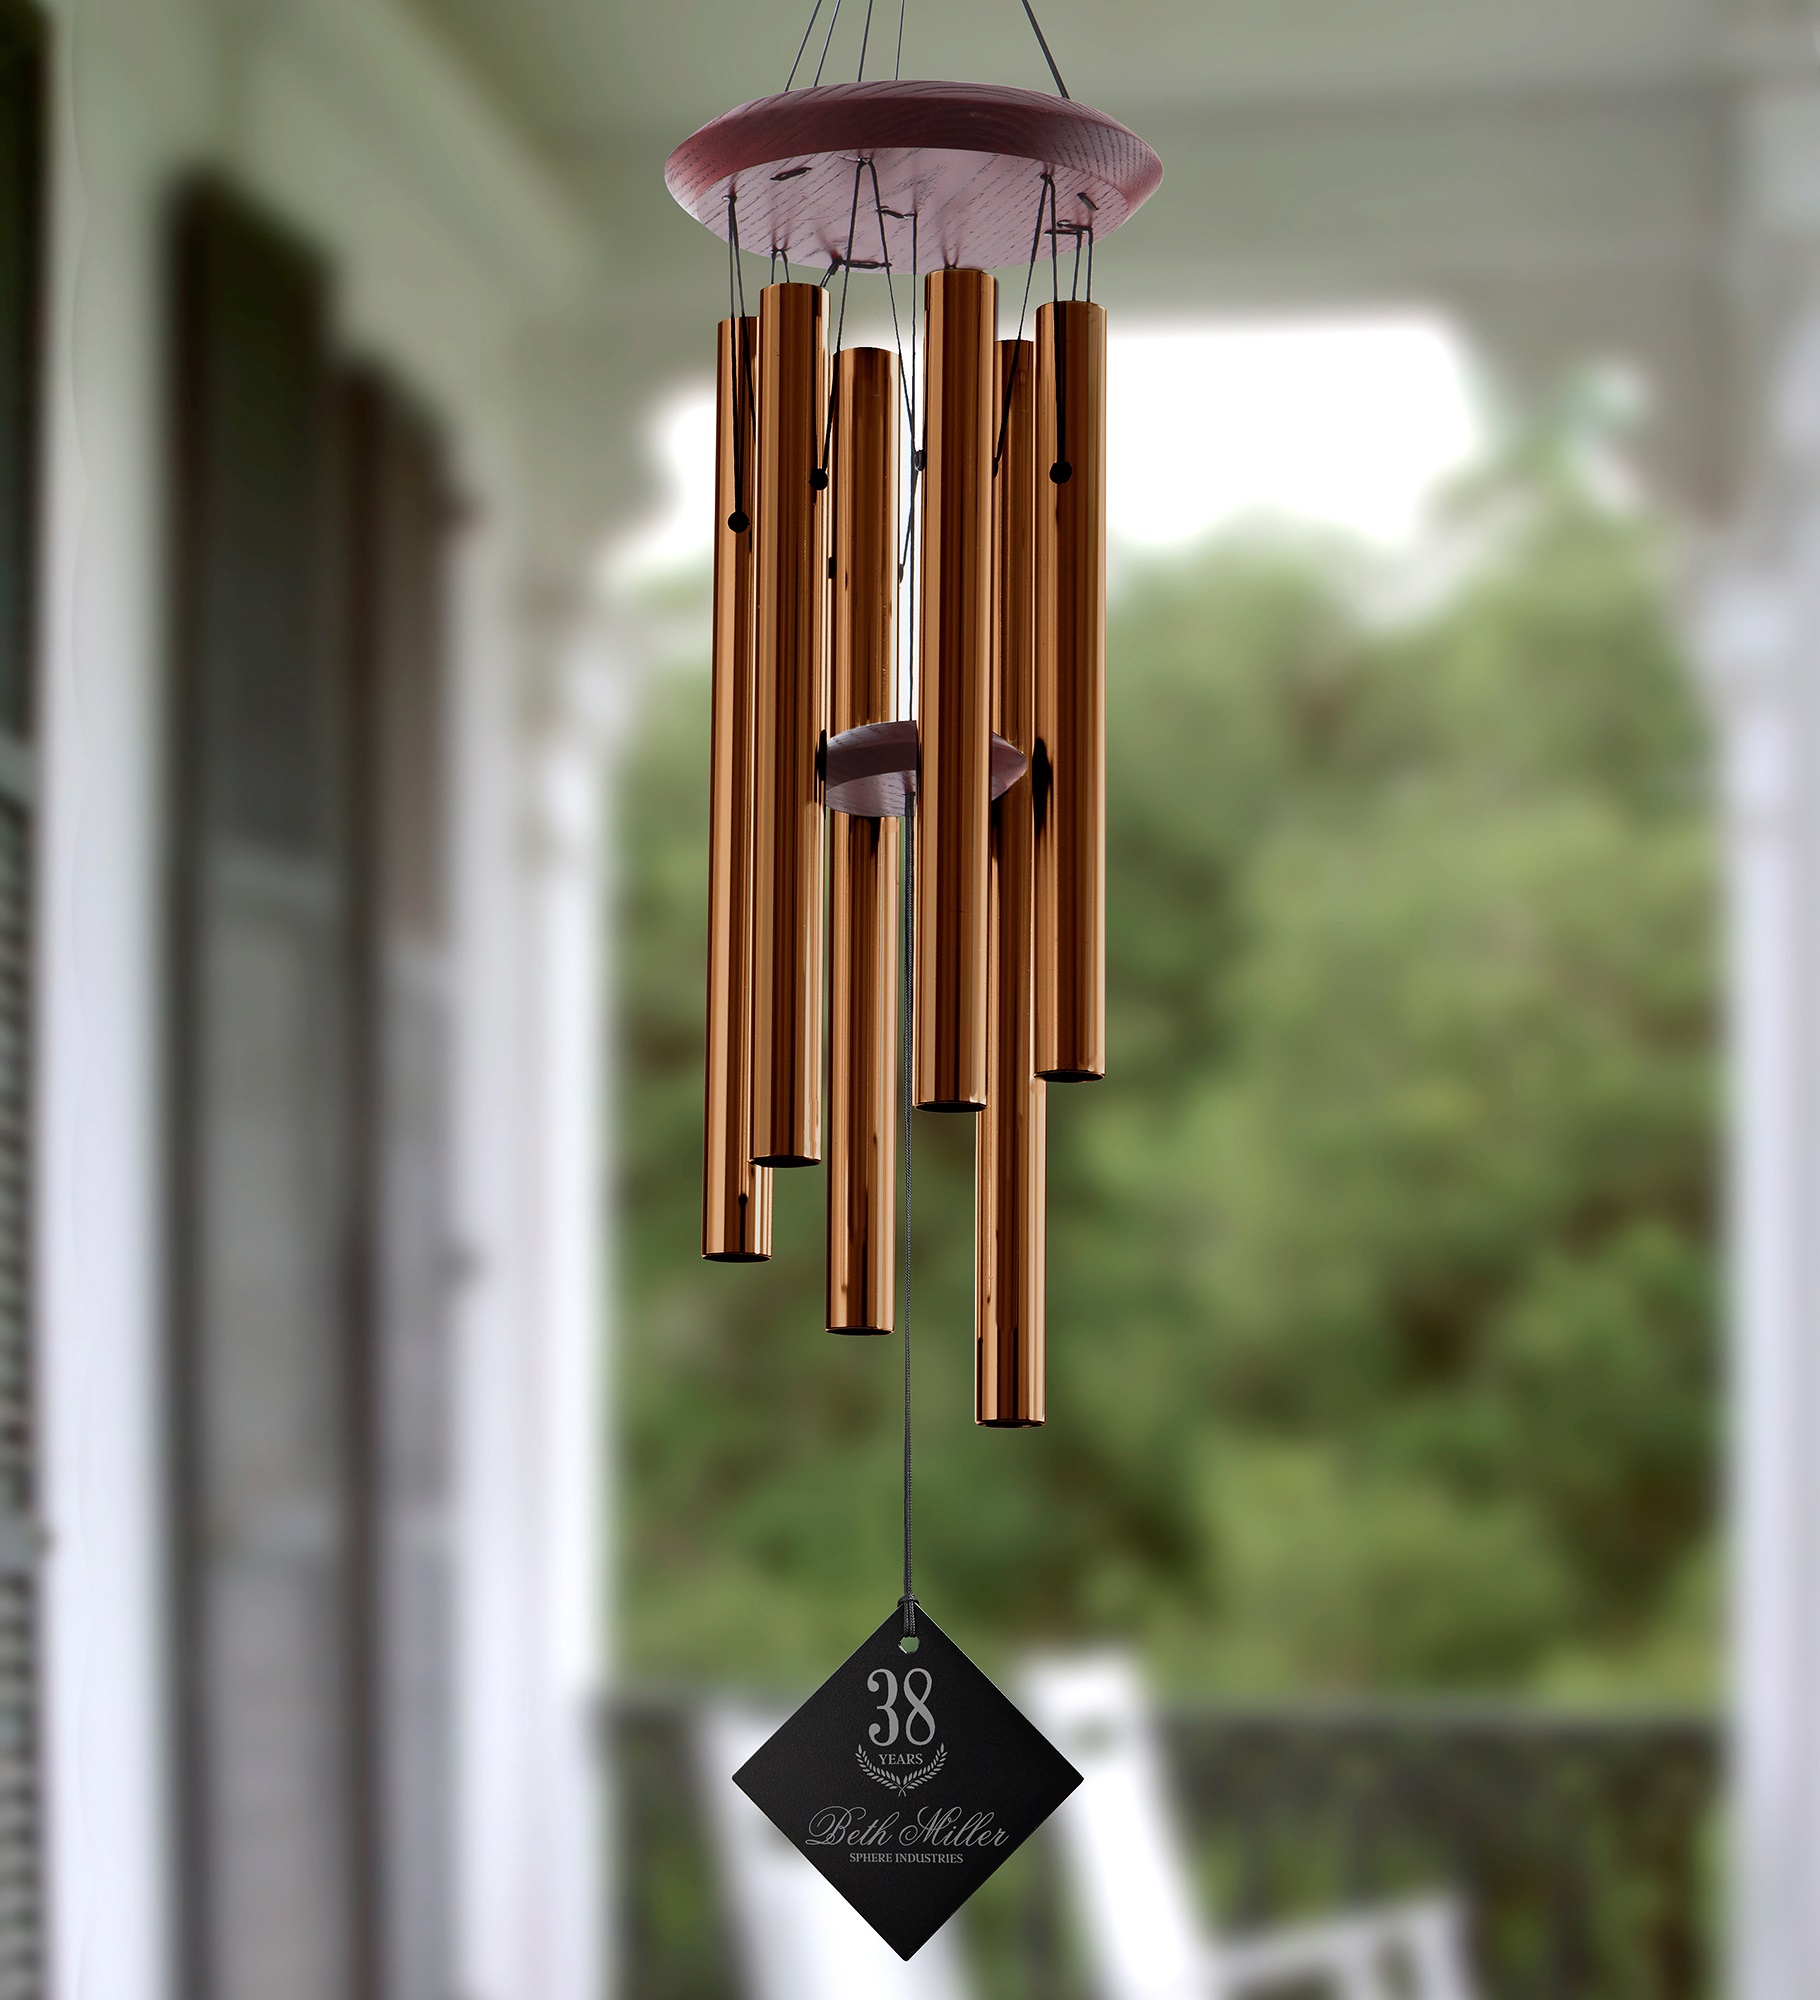 8 Tones Windchime Chime Bars for Kids Baby Percussion Musical Instrument Toy 